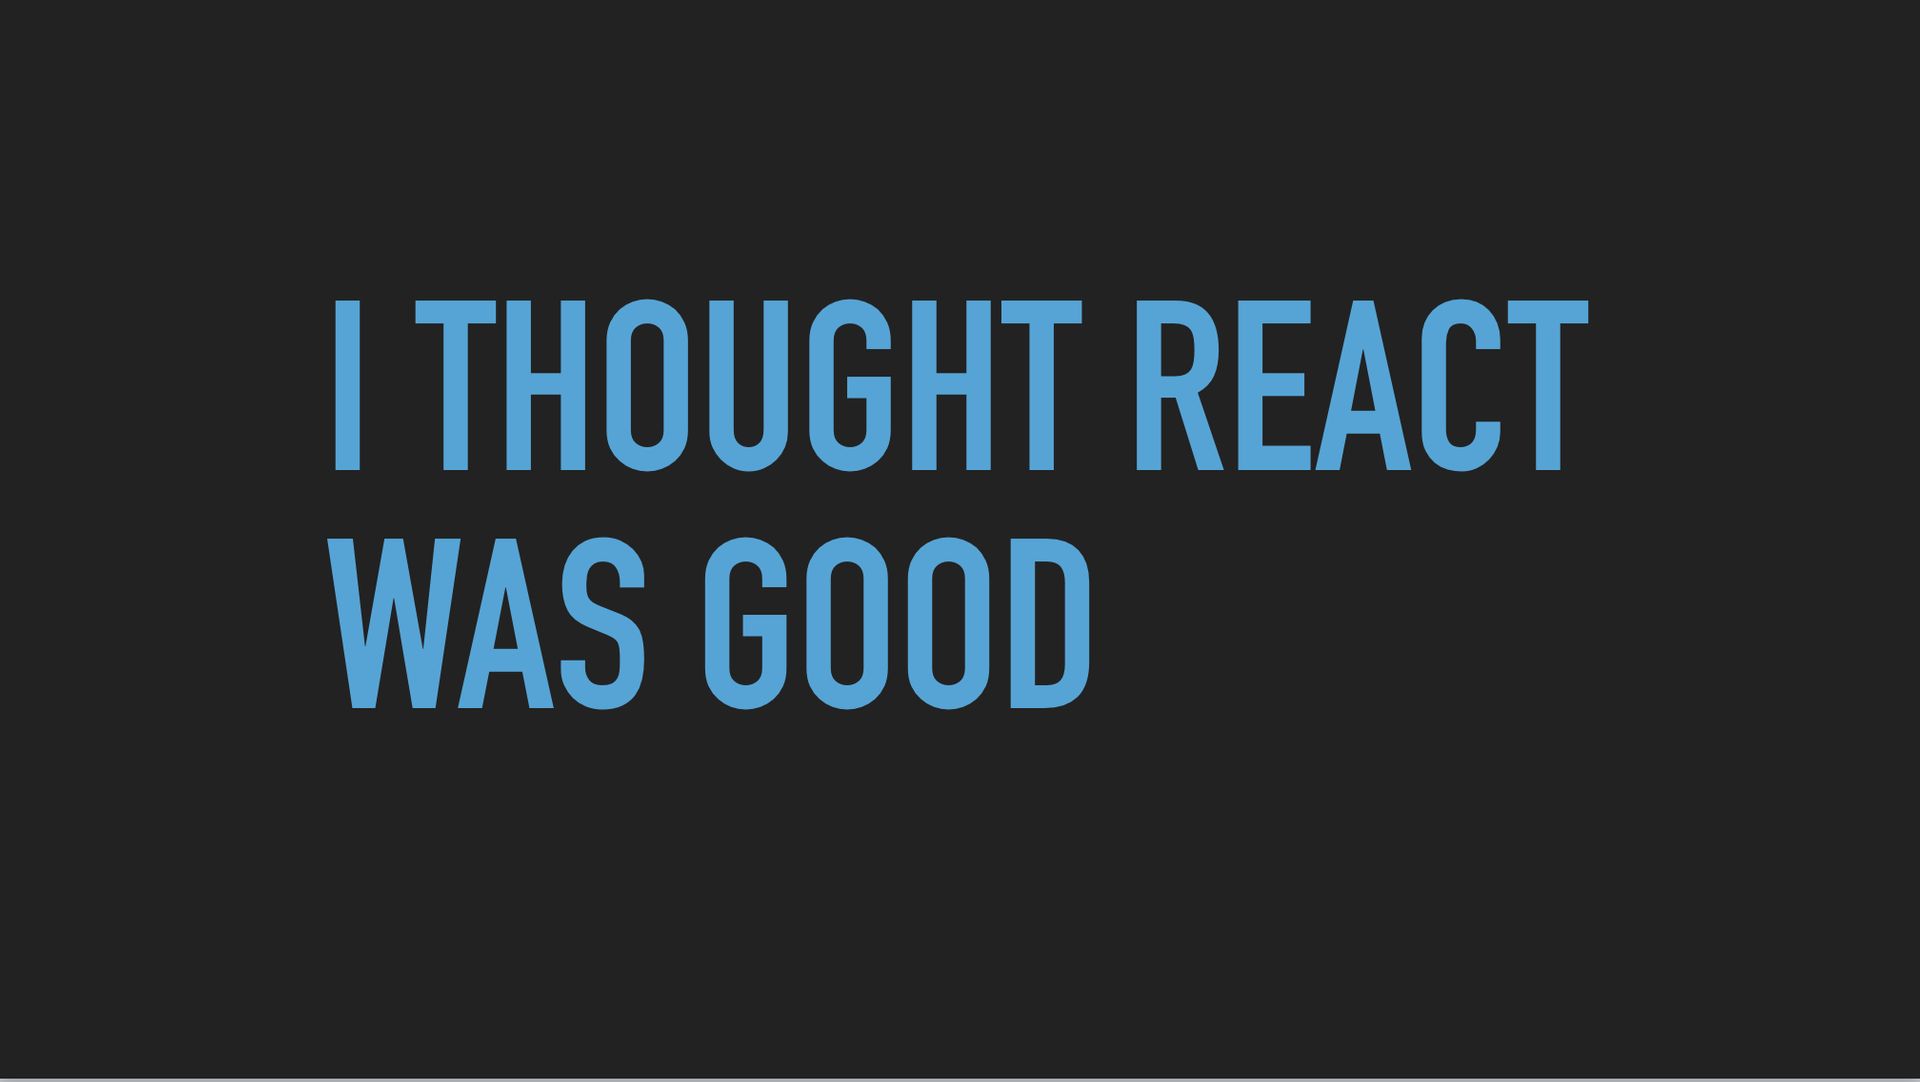 Slide text: I thought React was good.